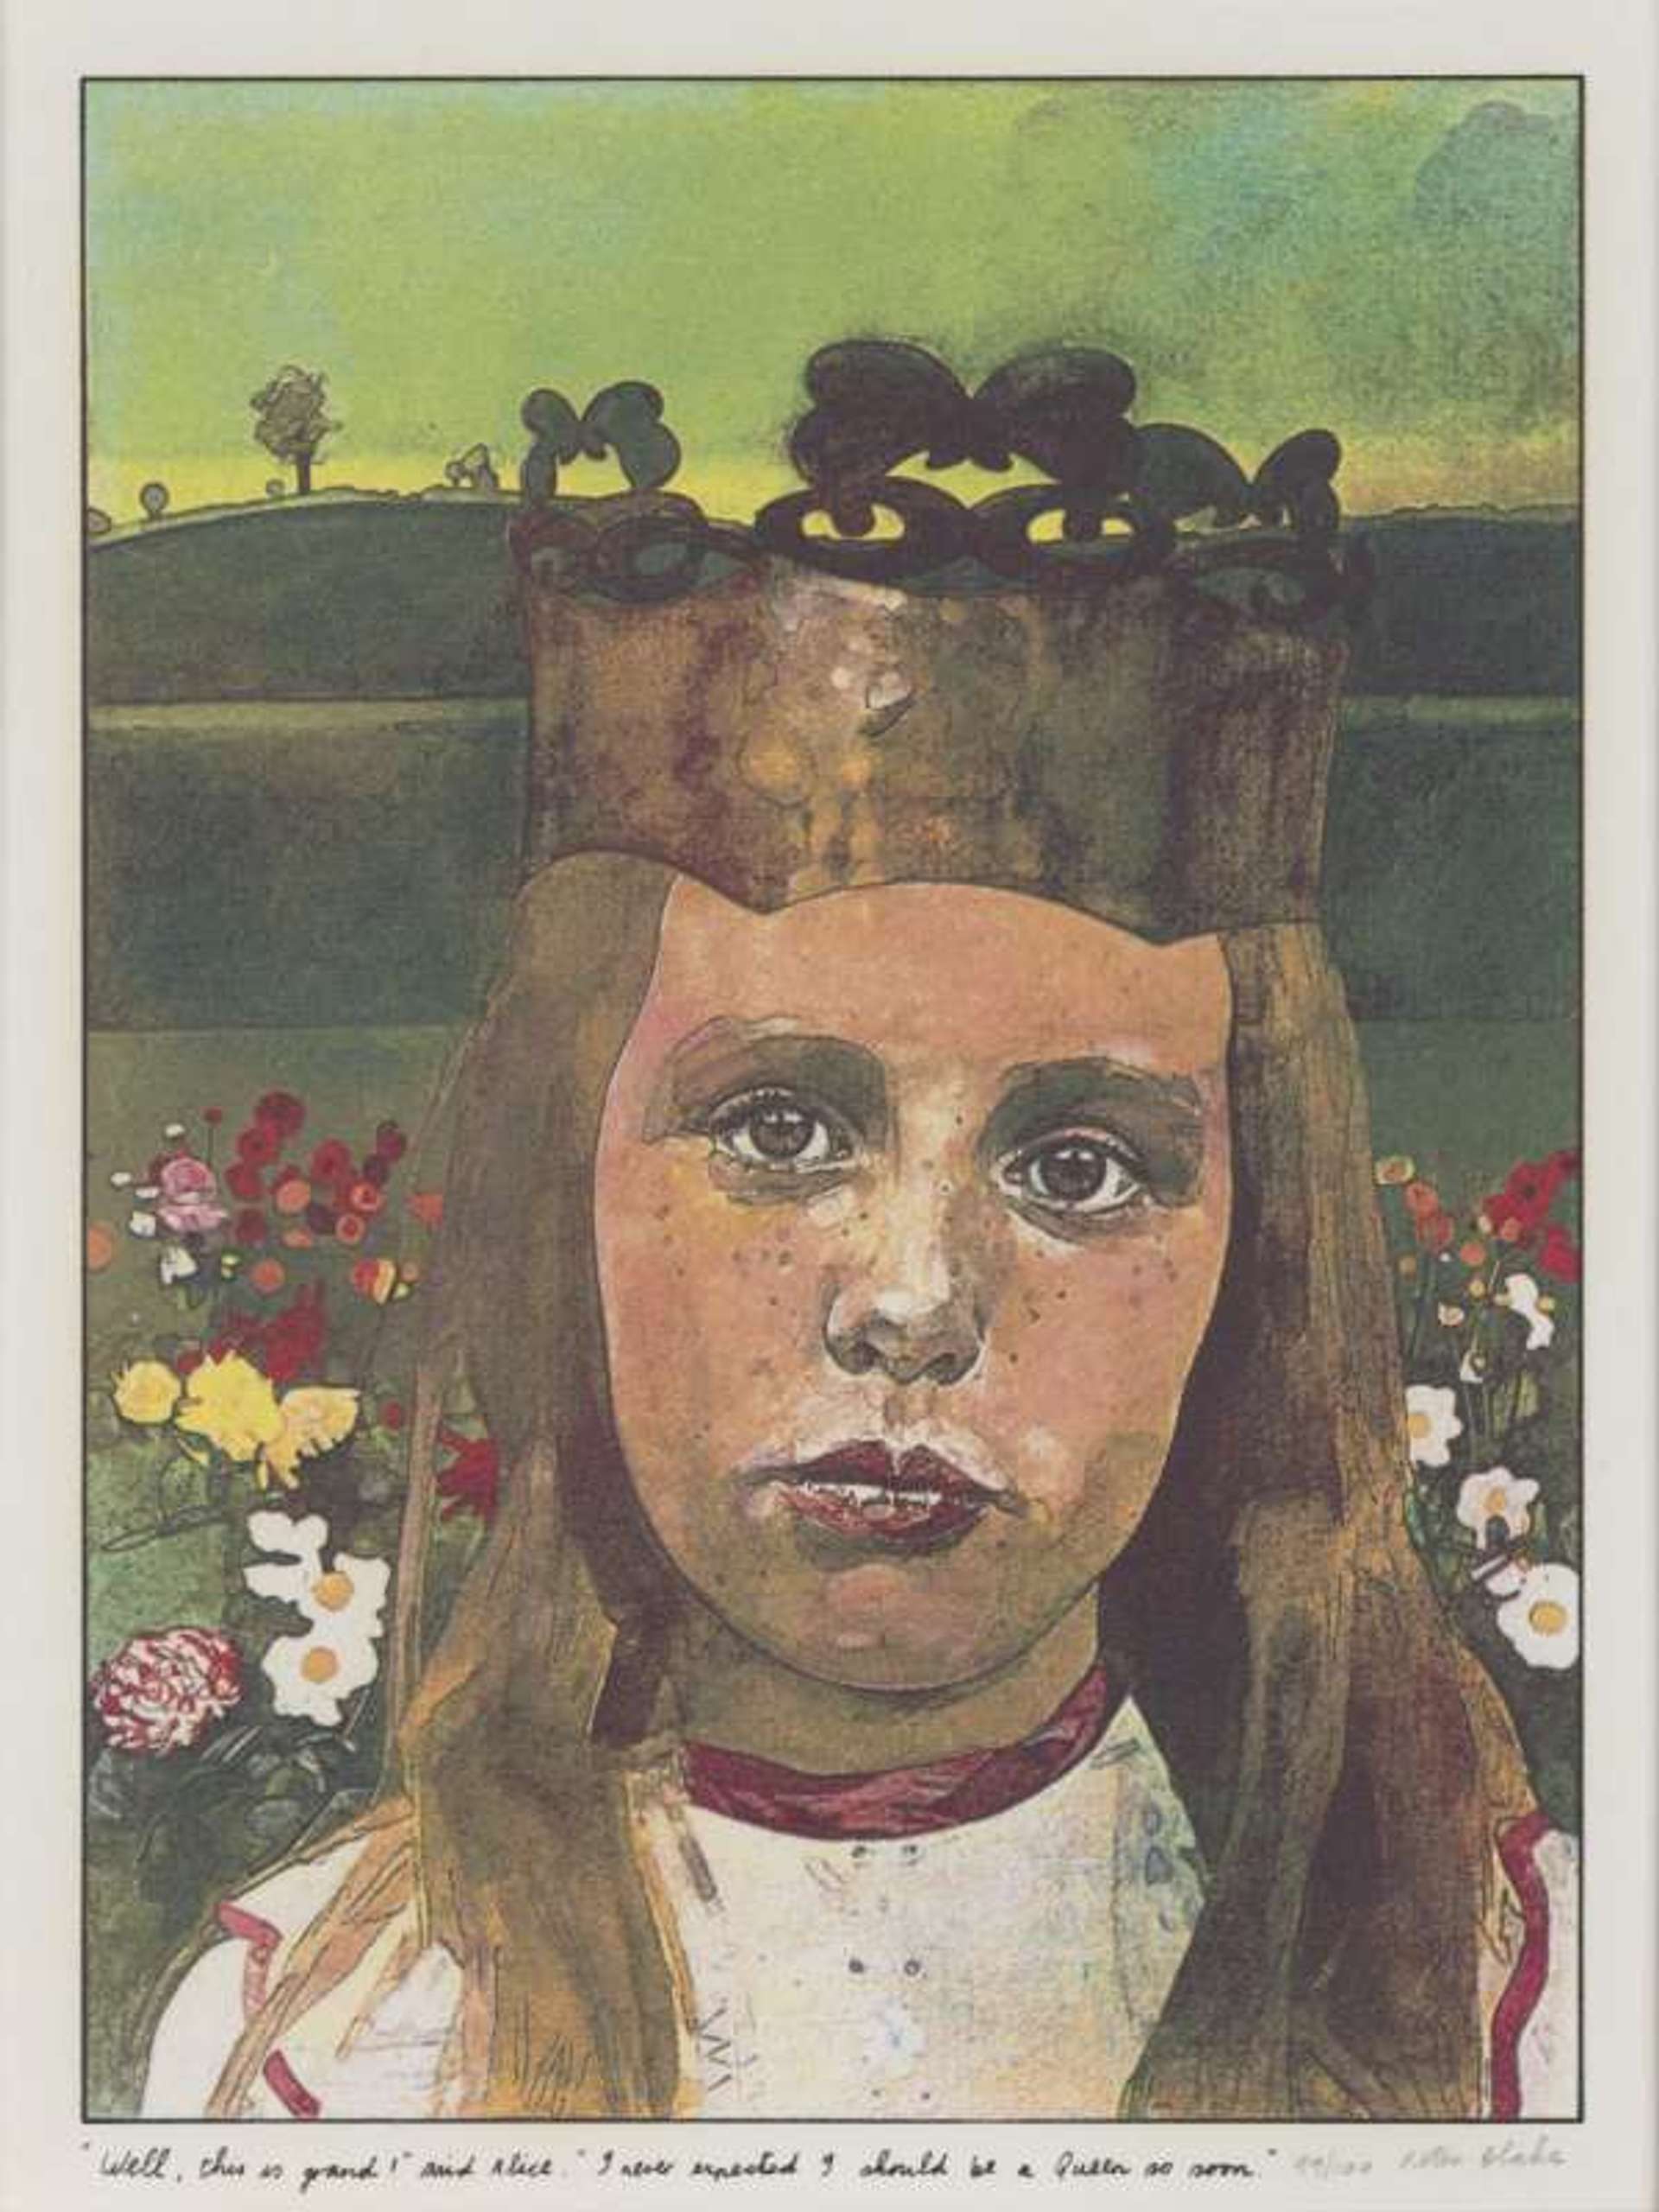 “Well, this is grand!” said Alice. “I never expected I should be a Queen so soon.” by Peter Blake